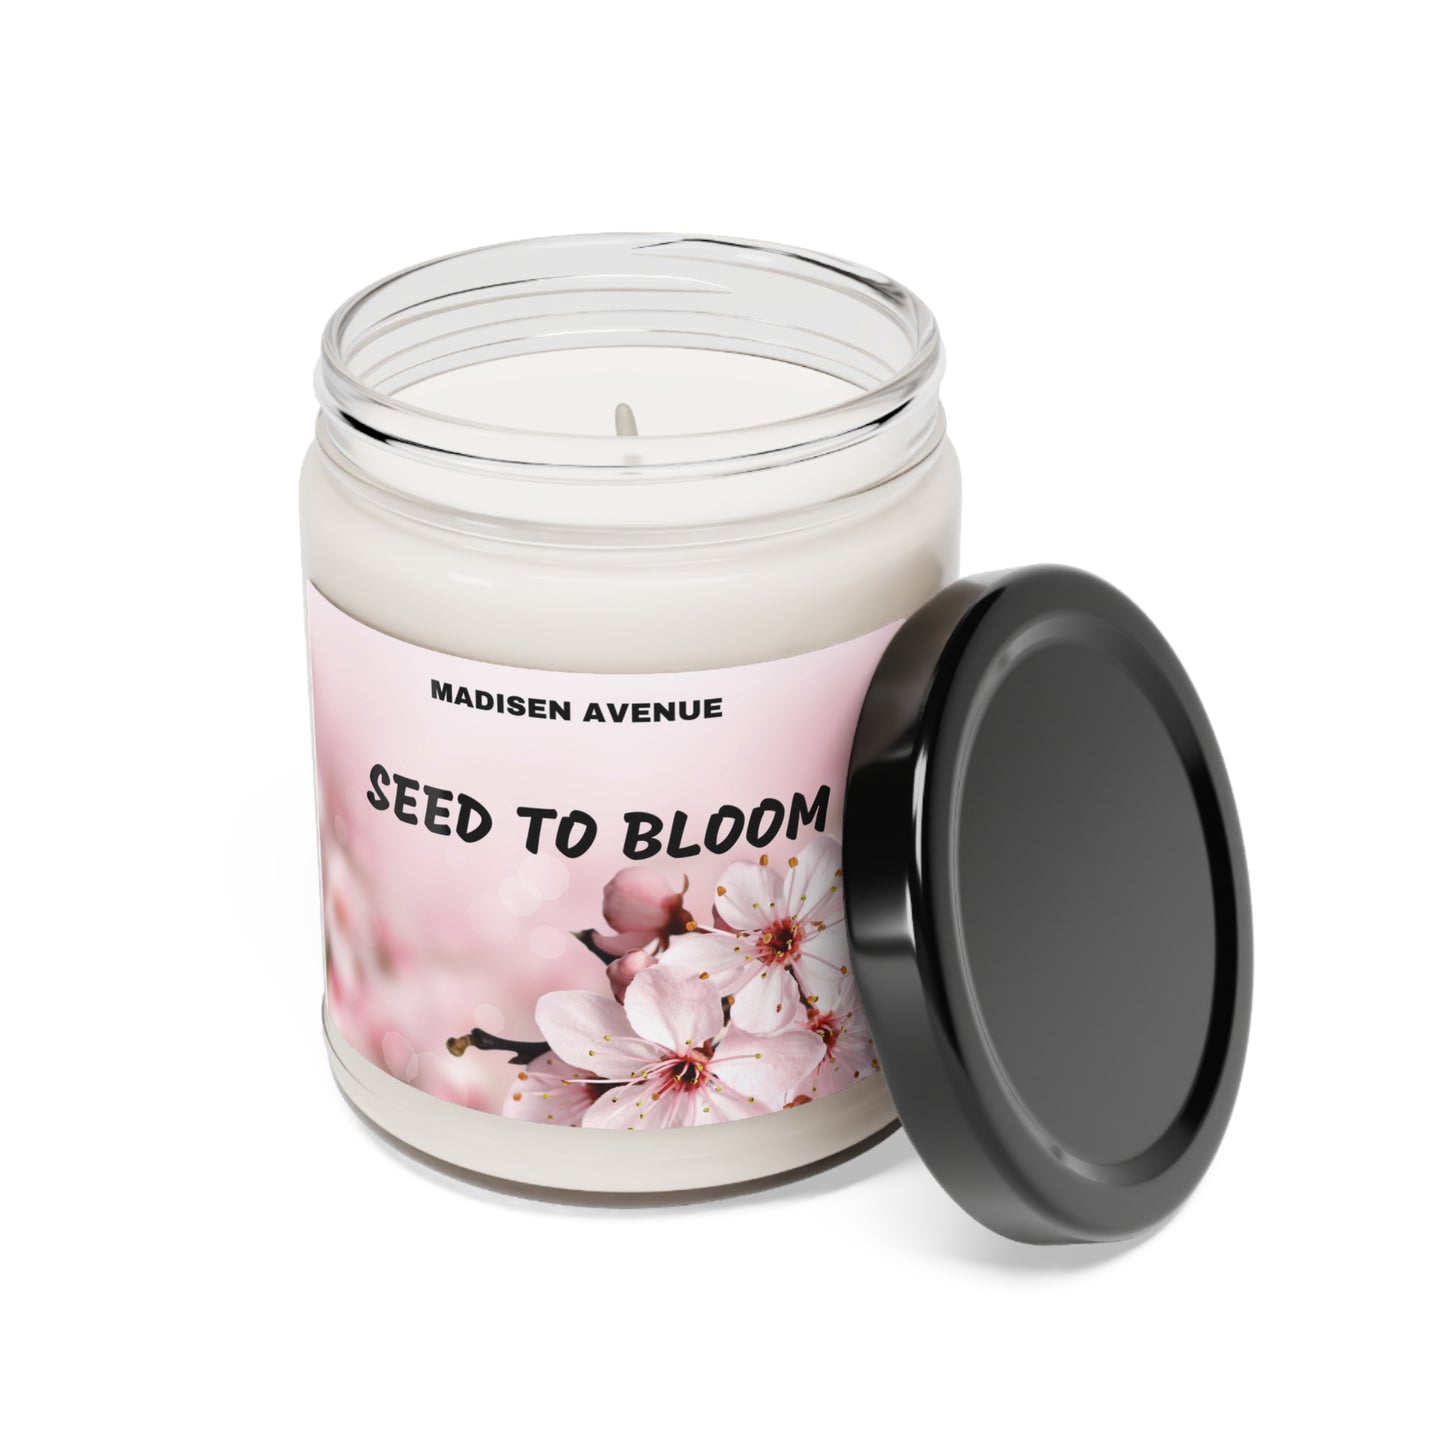 Madisen Avenue Seed to Bloom - Scented Soy Candle, 9oz